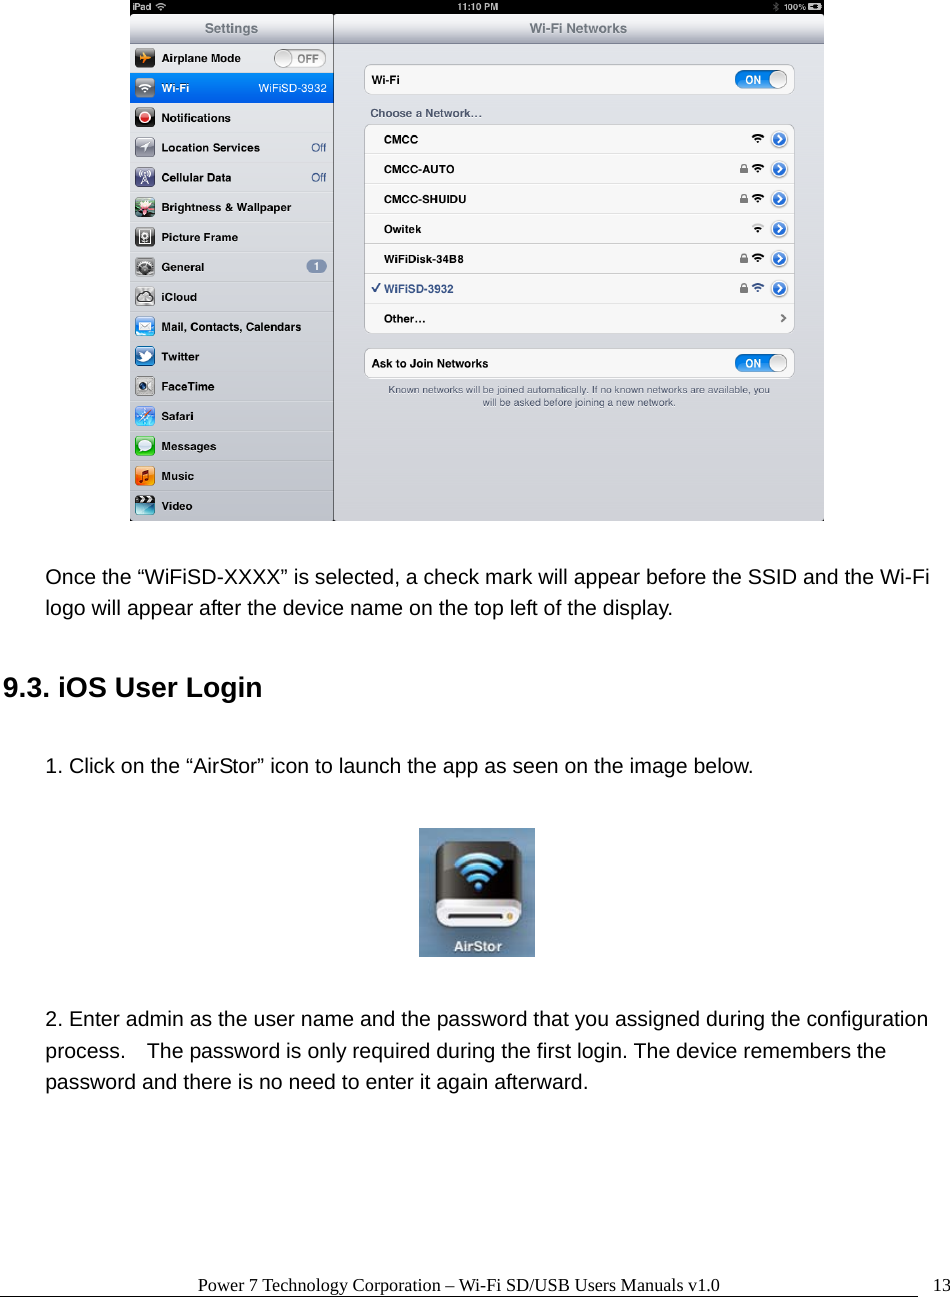 Power 7 Technology Corporation – Wi-Fi SD/USB Users Manuals v1.0  13   Once the “WiFiSD-XXXX” is selected, a check mark will appear before the SSID and the Wi-Fi logo will appear after the device name on the top left of the display.  9.3. iOS User Login  1. Click on the “AirStor” icon to launch the app as seen on the image below.    2. Enter admin as the user name and the password that you assigned during the configuration process.    The password is only required during the first login. The device remembers the password and there is no need to enter it again afterward.  